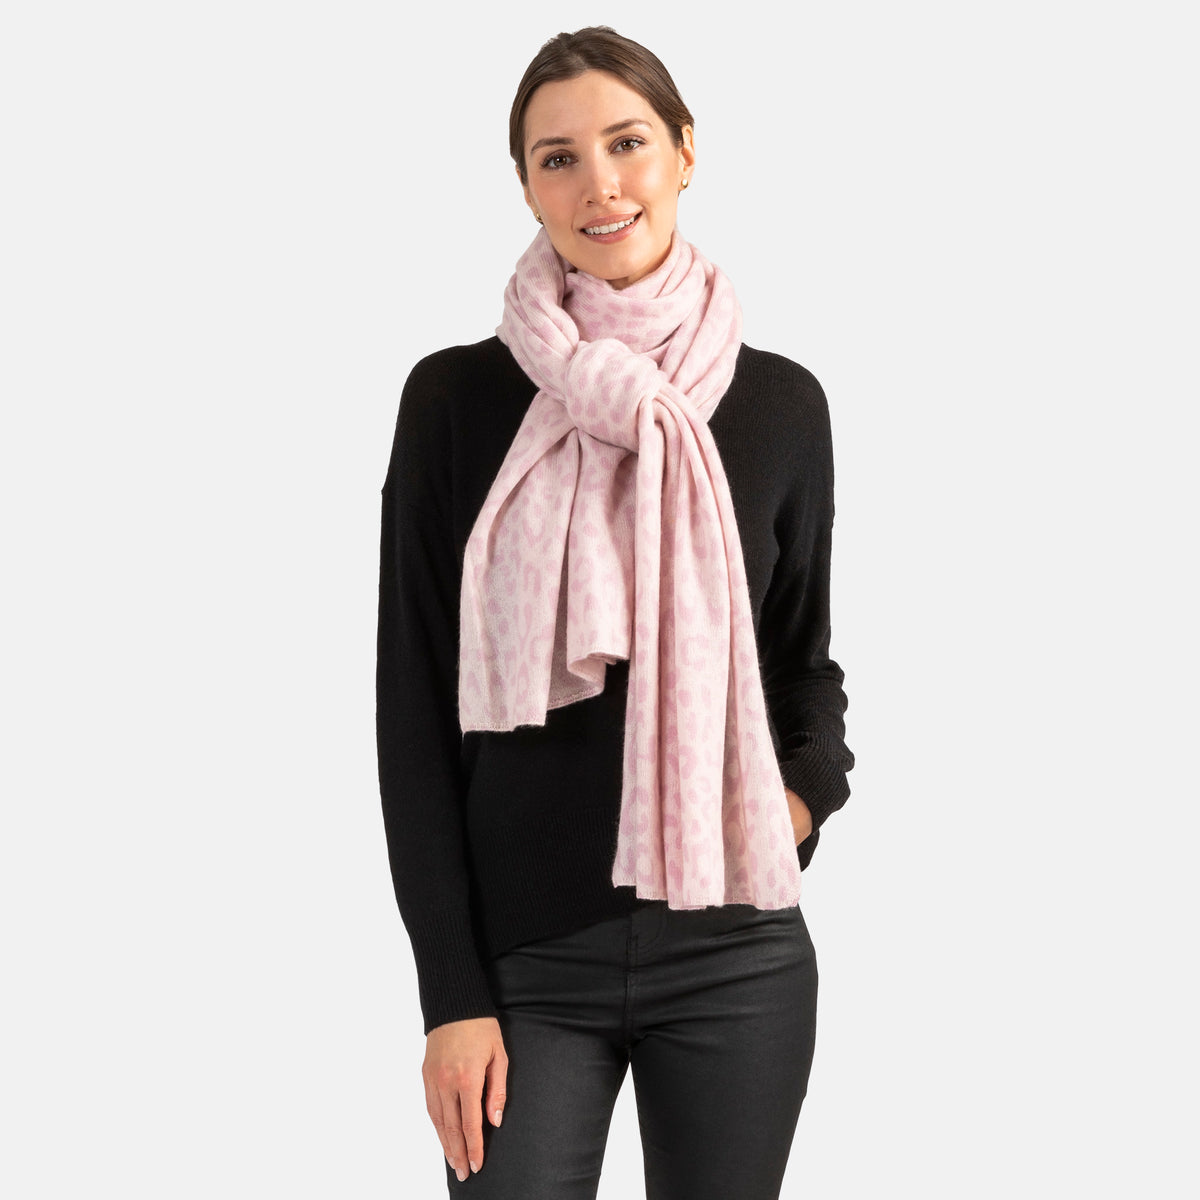 Picture of a woman wearing an oversized knitted cashmere travel wrap or scarf with a cheetah pattern in pink tones.